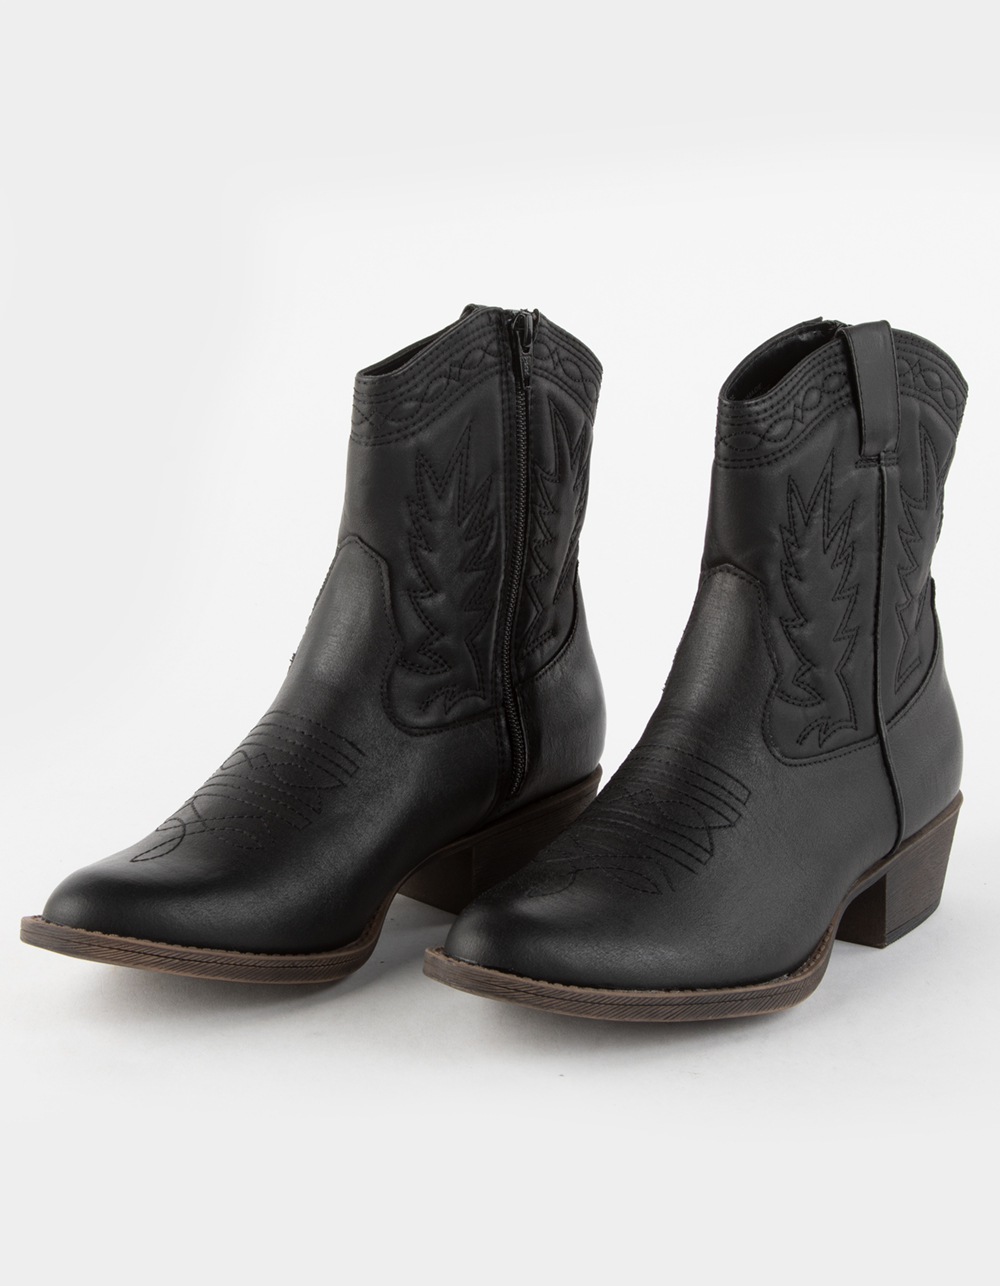 COCONUTS by Matisse Pistol Womens Western Boots - BLACK | Tillys